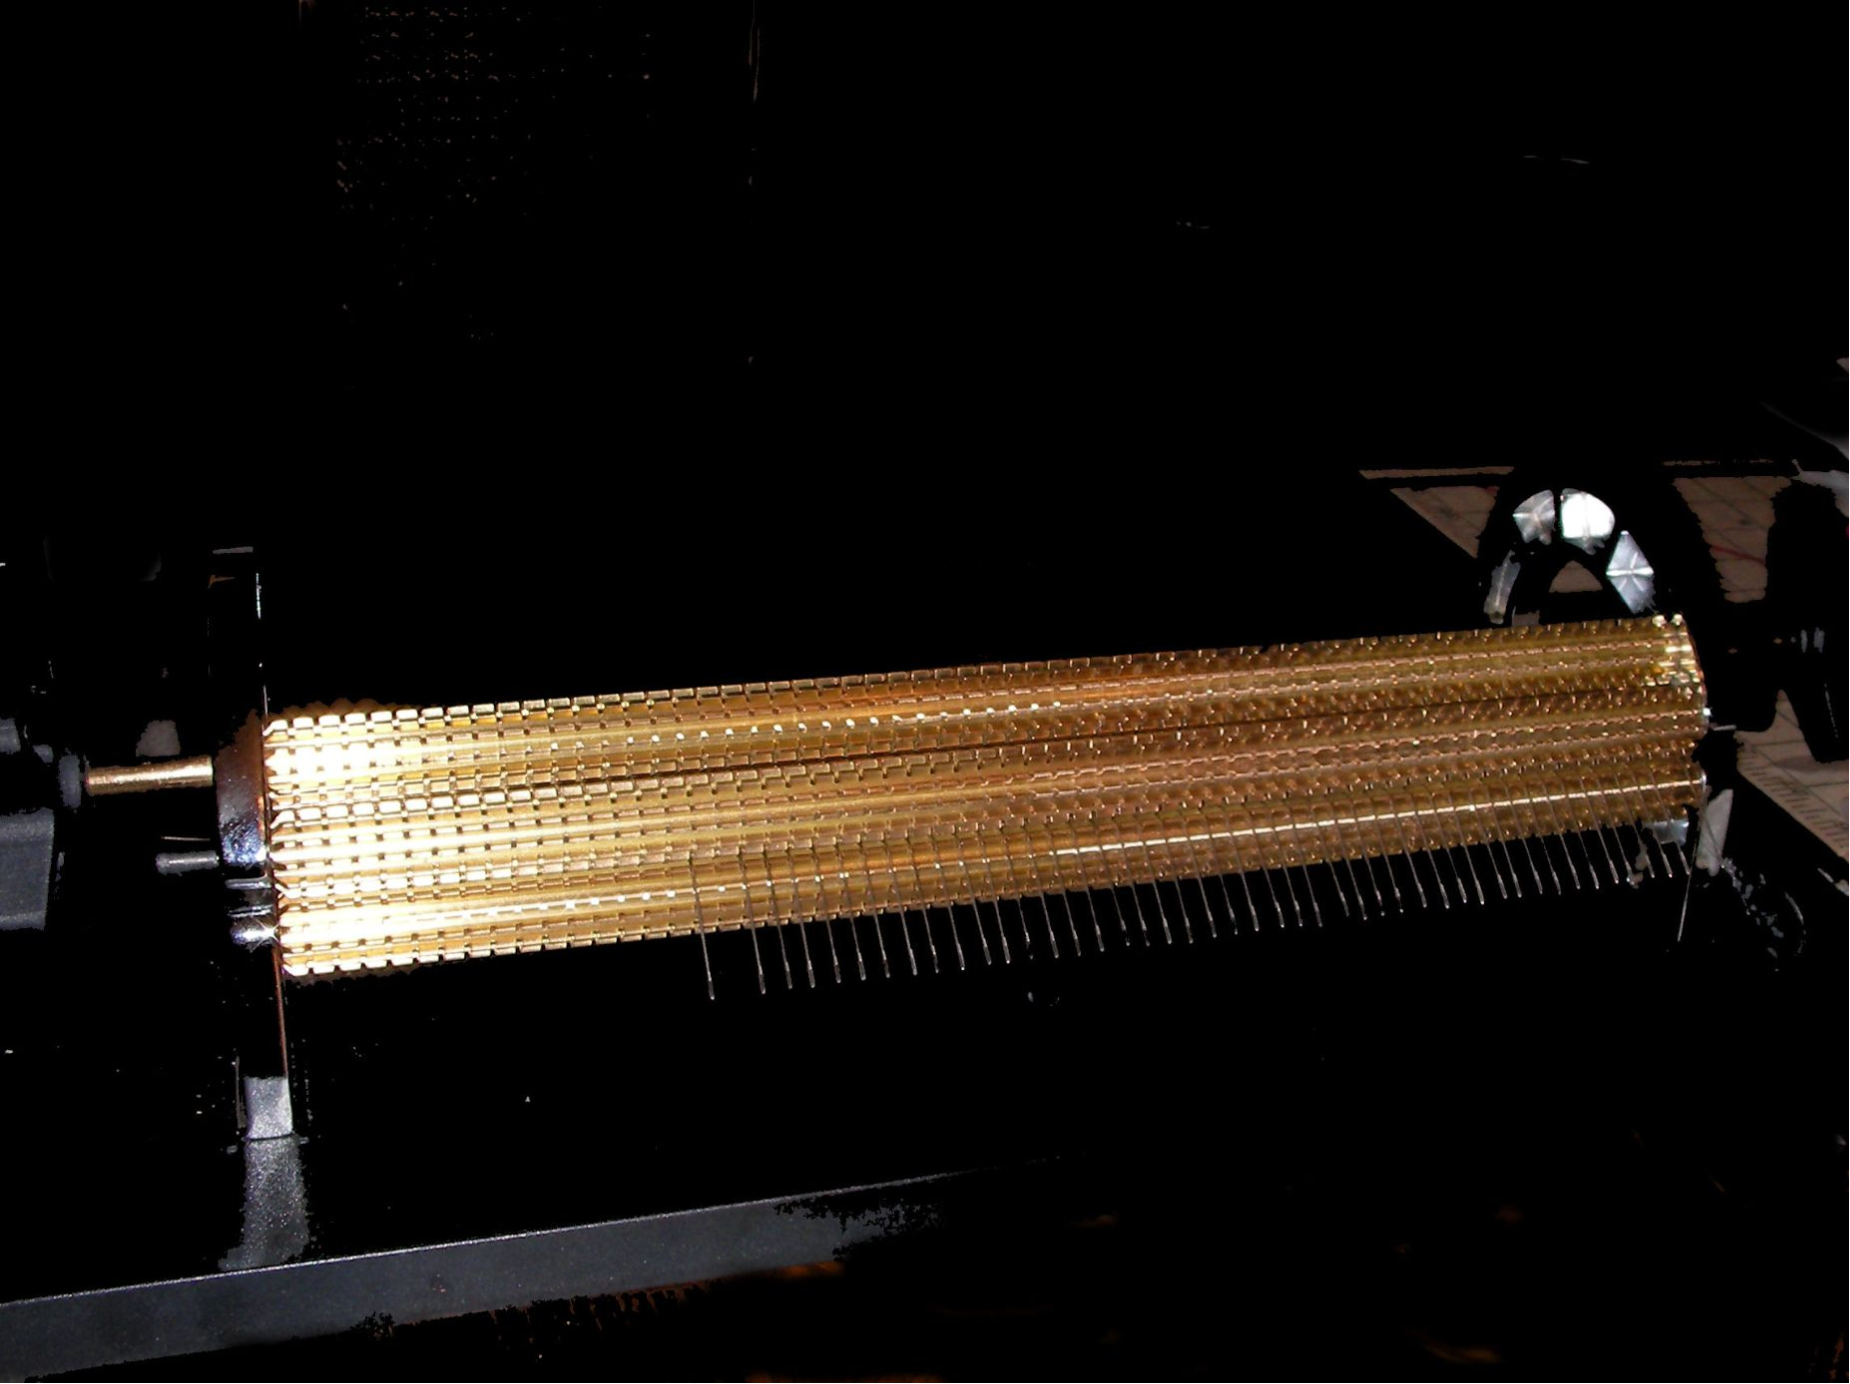 note the modified pleating machine cylinders, to allow using more needles